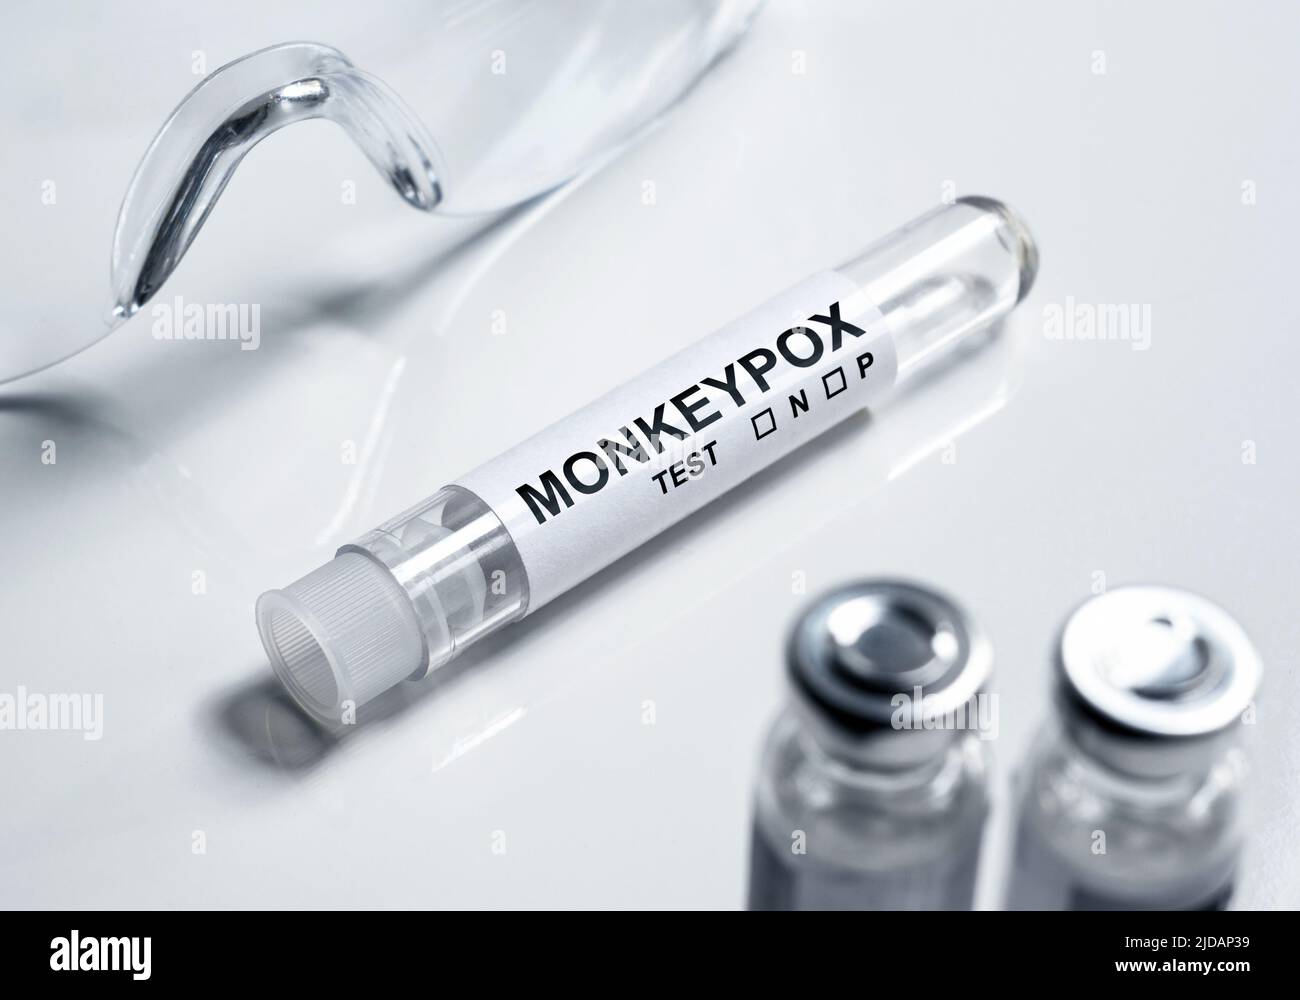 Monkey pox test tube in lab, on white medical desk. Equipment for monkeypox virus diagnosis and smallpox research. Concept of monkey pox outbreak, tes Stock Photo